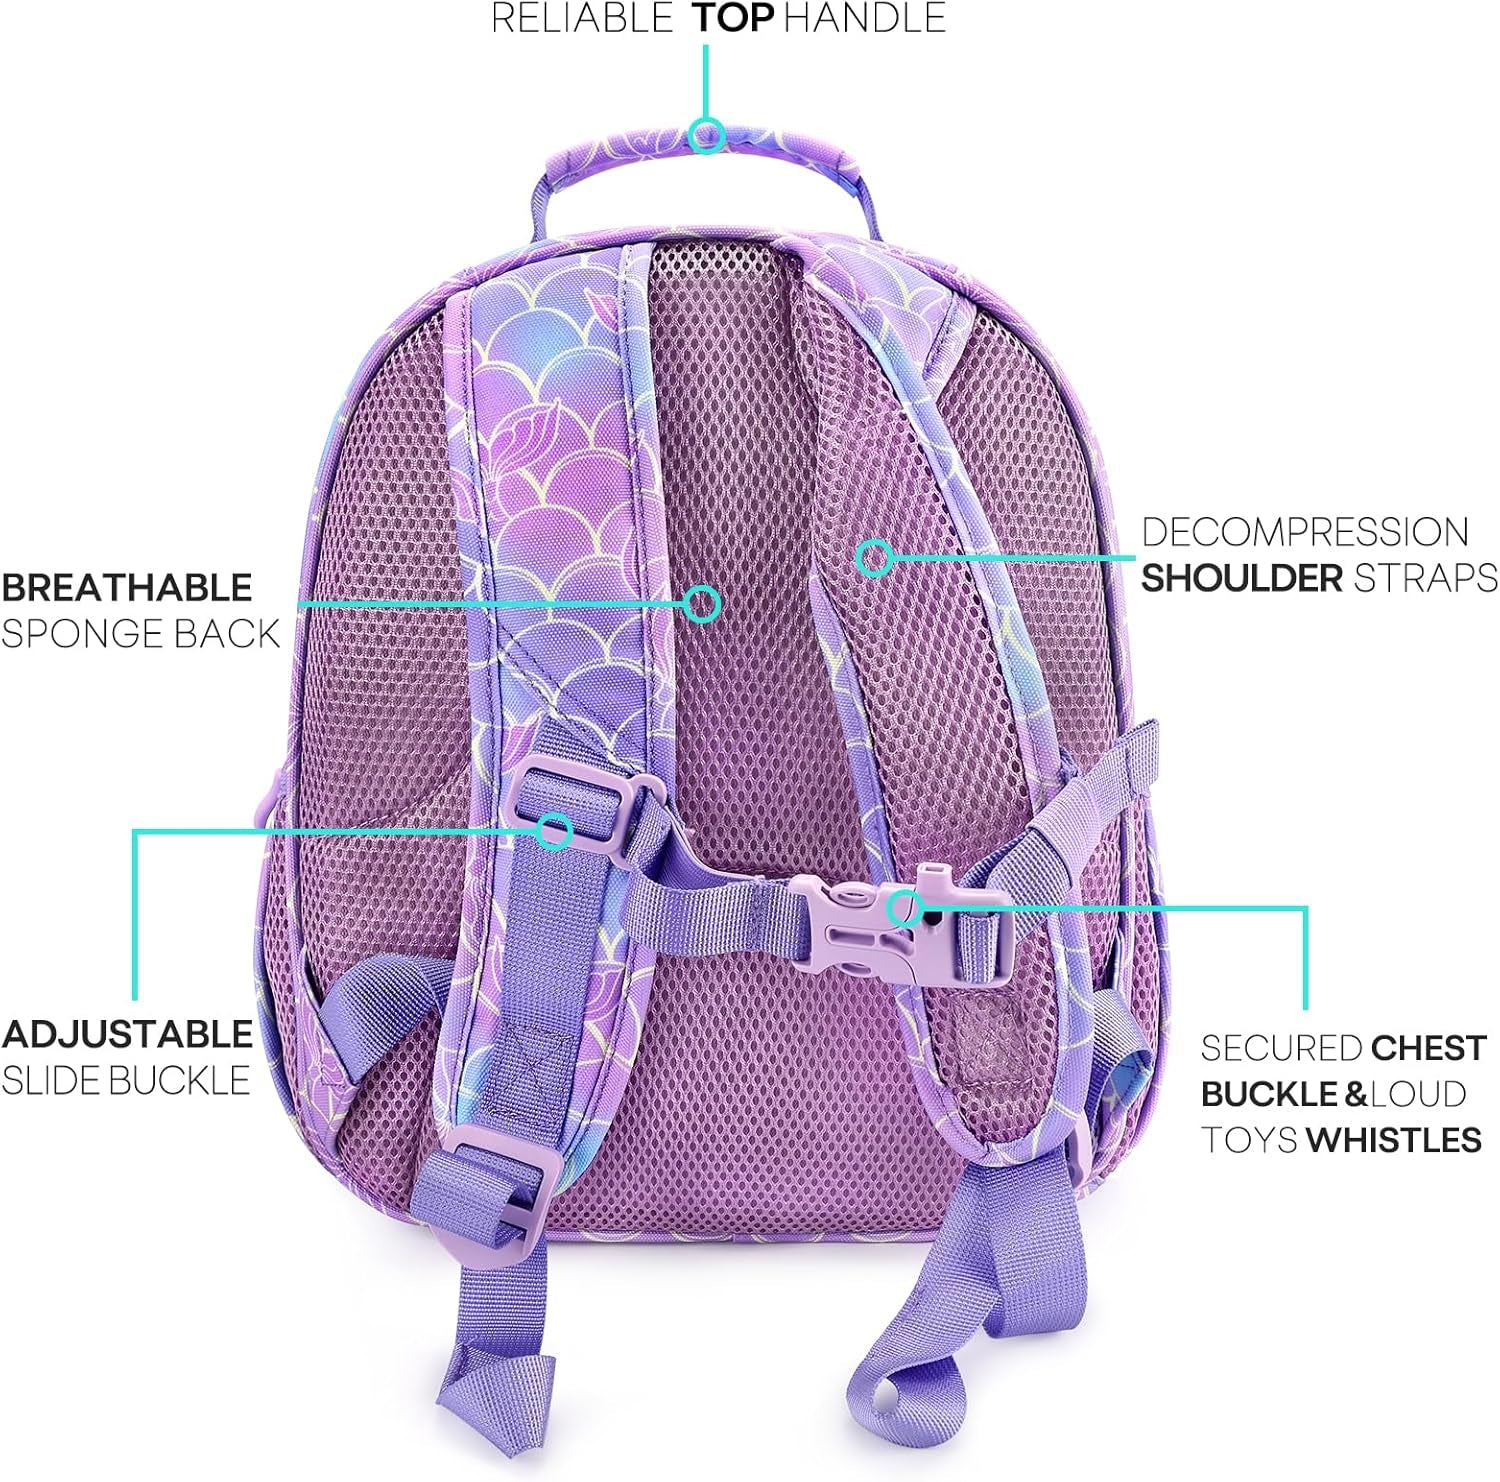 Backpack Leash for Toddlers 1-3: Baby Backpack for Girls with Anti-Lost Harness - Mermaid